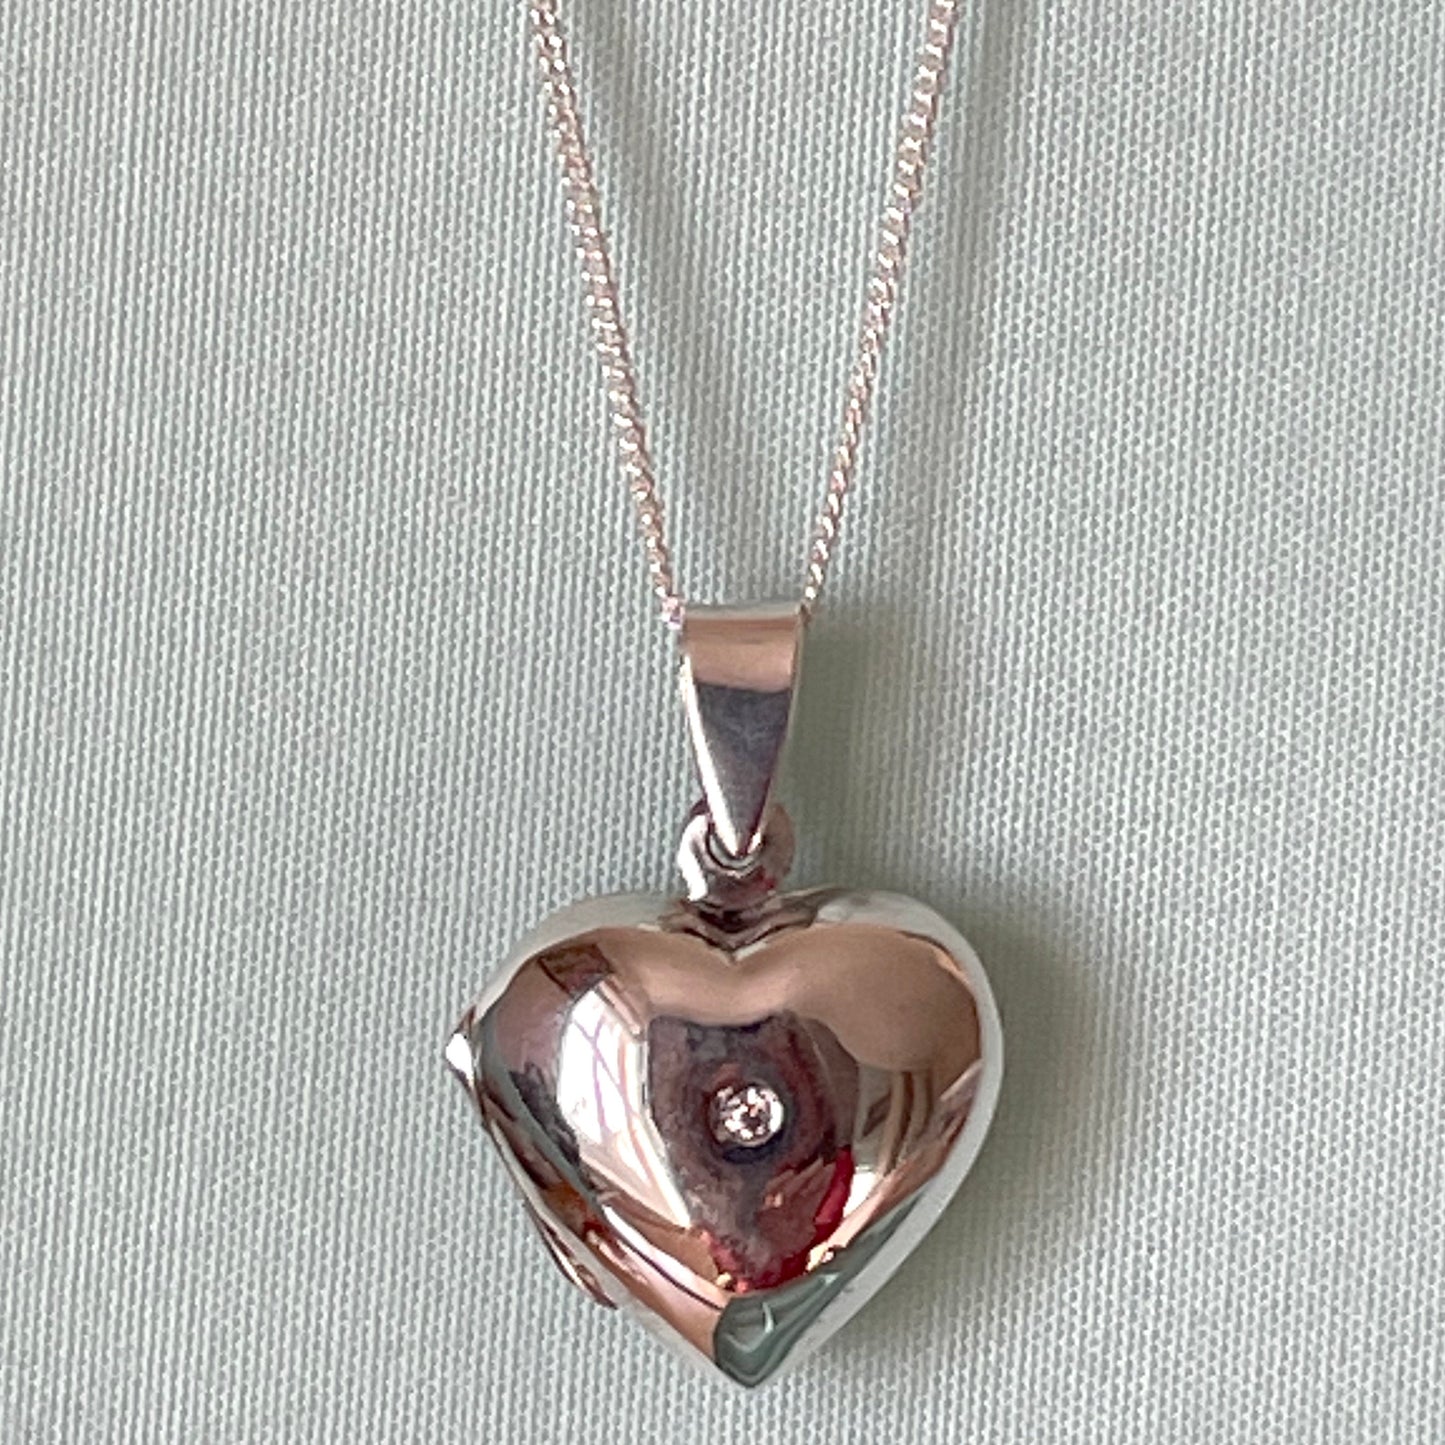 Sterling silver heart locket with cubic zircona stone